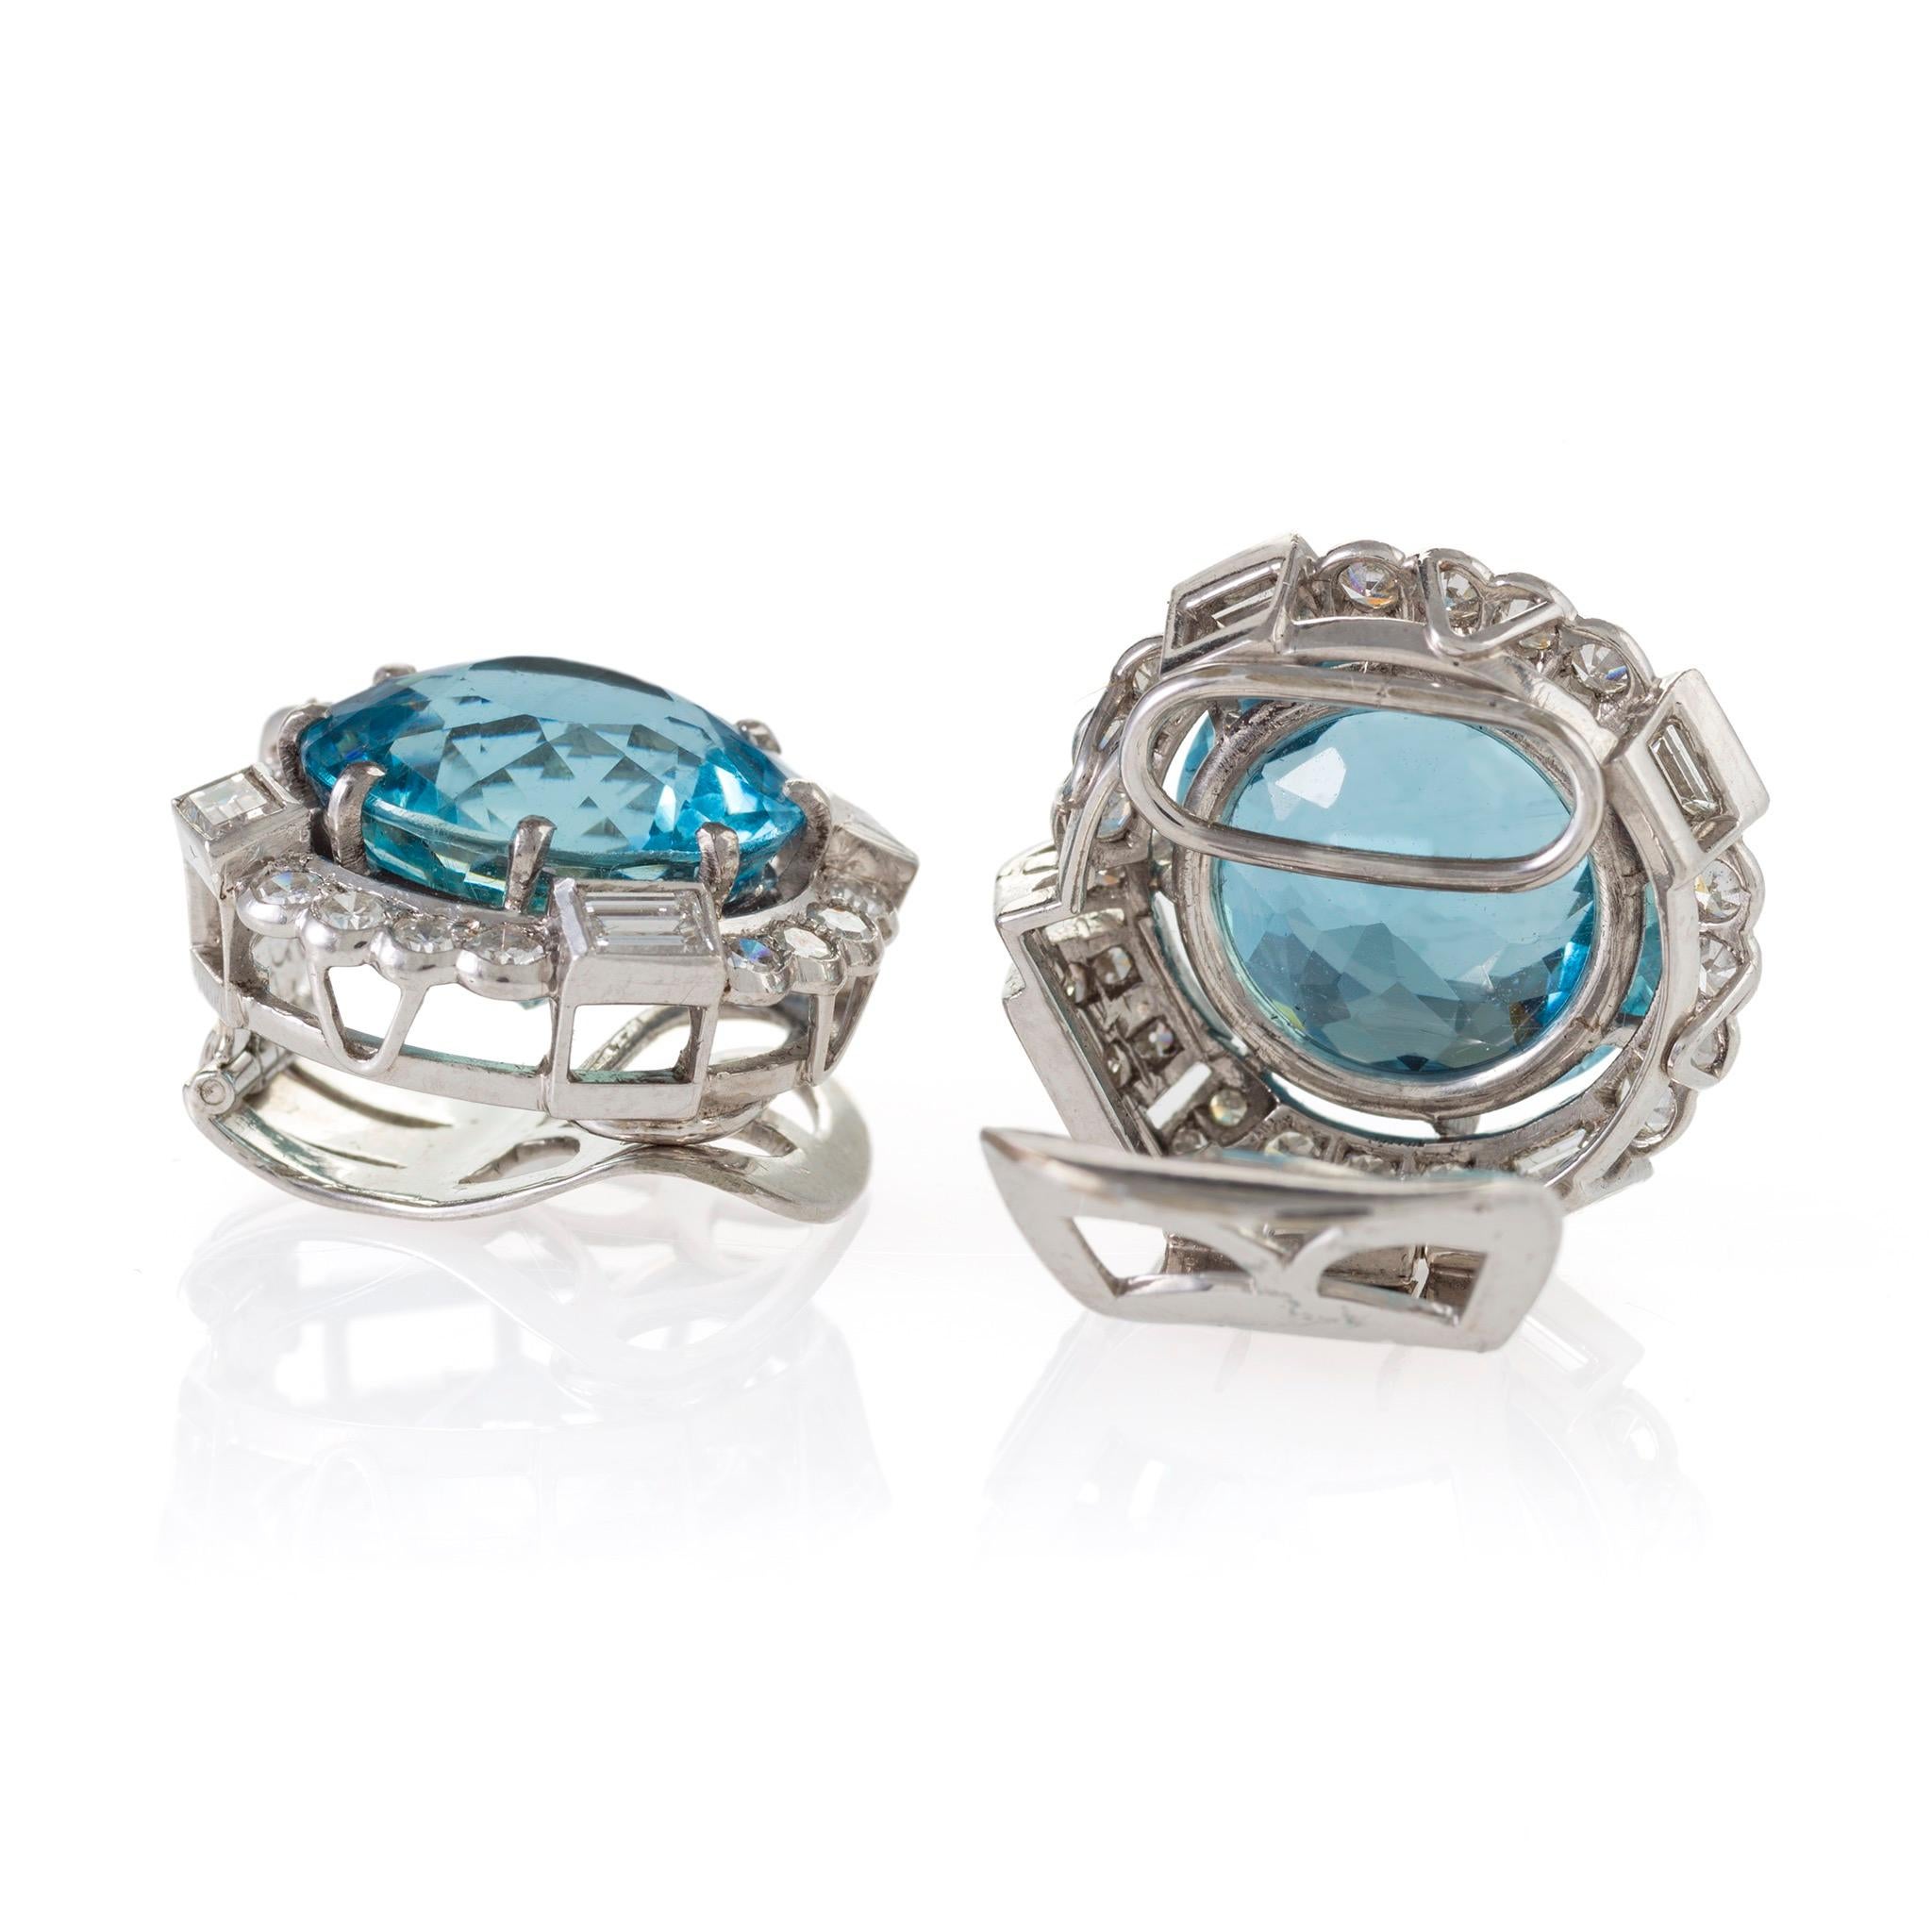 These fancy-cut aquamarine and diamond clipback earrings are mounted in platinum and date from the mid-20th century. Their circular-fancy-cut aquamarines, weighing approximately 8.35 and 9.35 carats, are each set within a frame of round